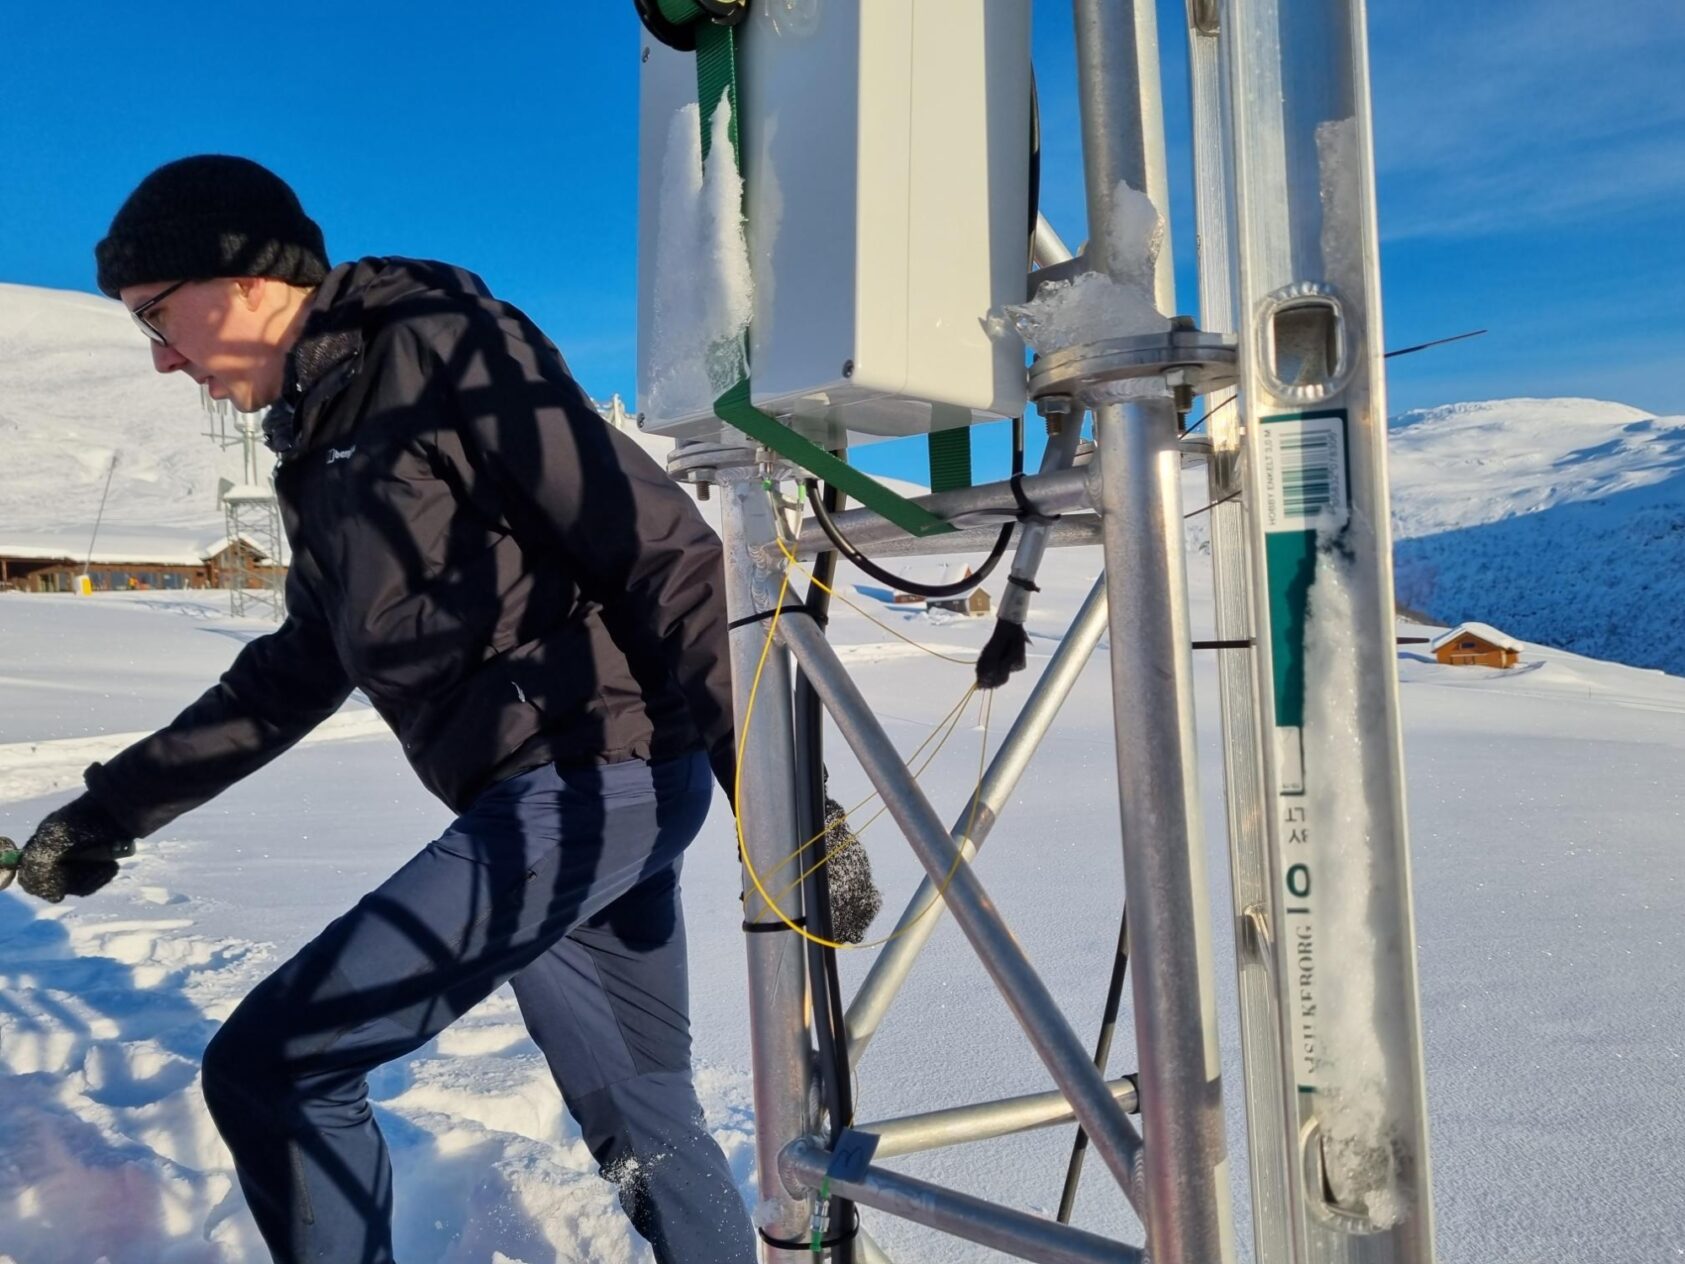 Peter James Thomas, NORCE, Here we see NORCE researcher, Adam Funnell, and part of the technology that captures and forwards the signals from the sensors on the ground under the snow., 20230119 113246, , 